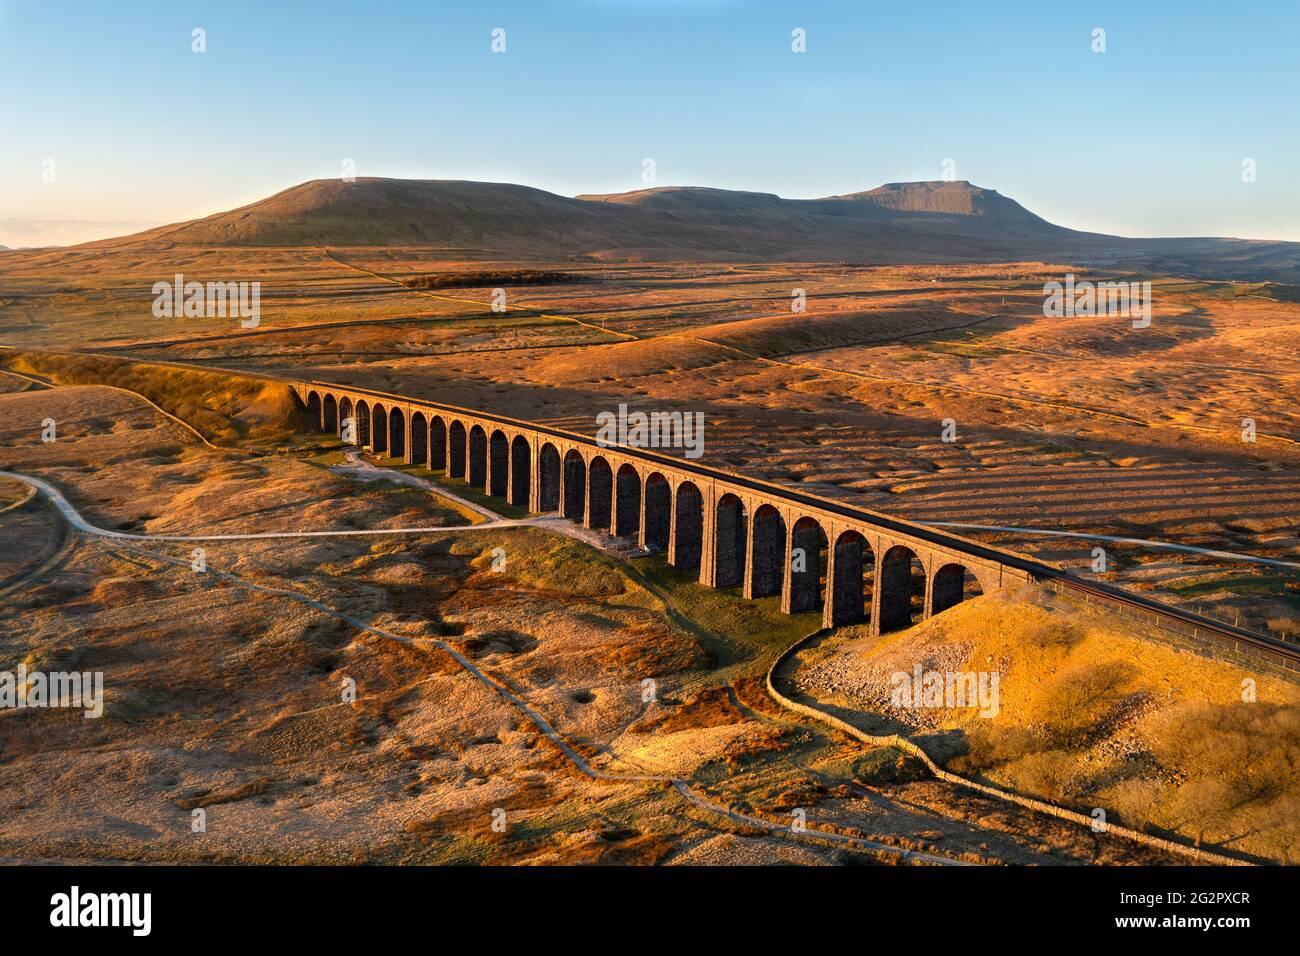 Golden morning light on Ribblehead Viaduct arches surrounded by wide open moorland. Taken with a drone in the Yorkshire Dales National Park, UK. Stock Photo